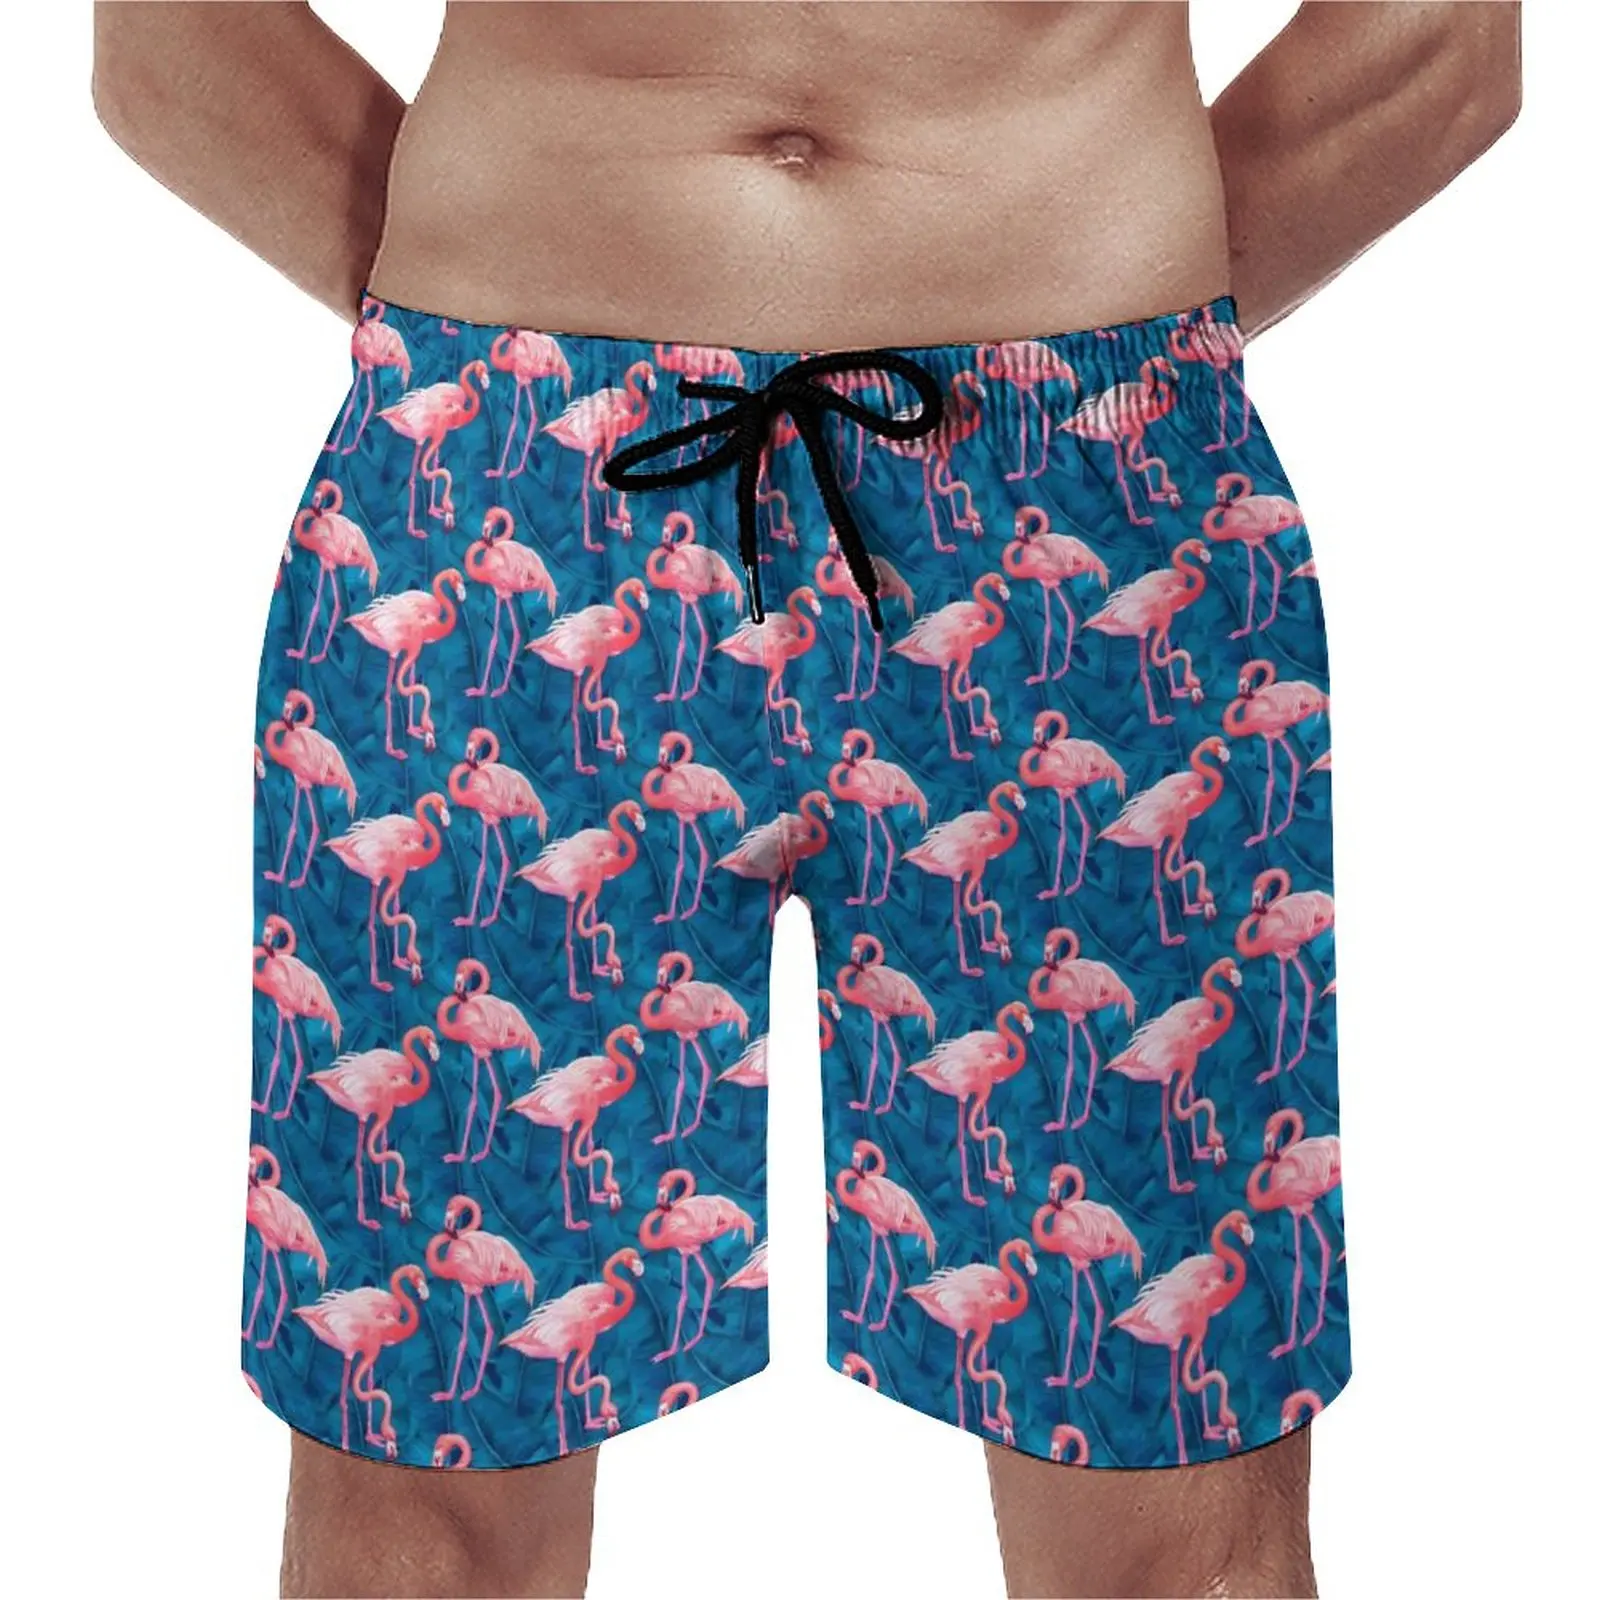 

Tropical Birds Board Shorts Flamingos And Leaves Casual Board Short Pants Male Design Running Surf Quick Dry Beach Trunks Gift